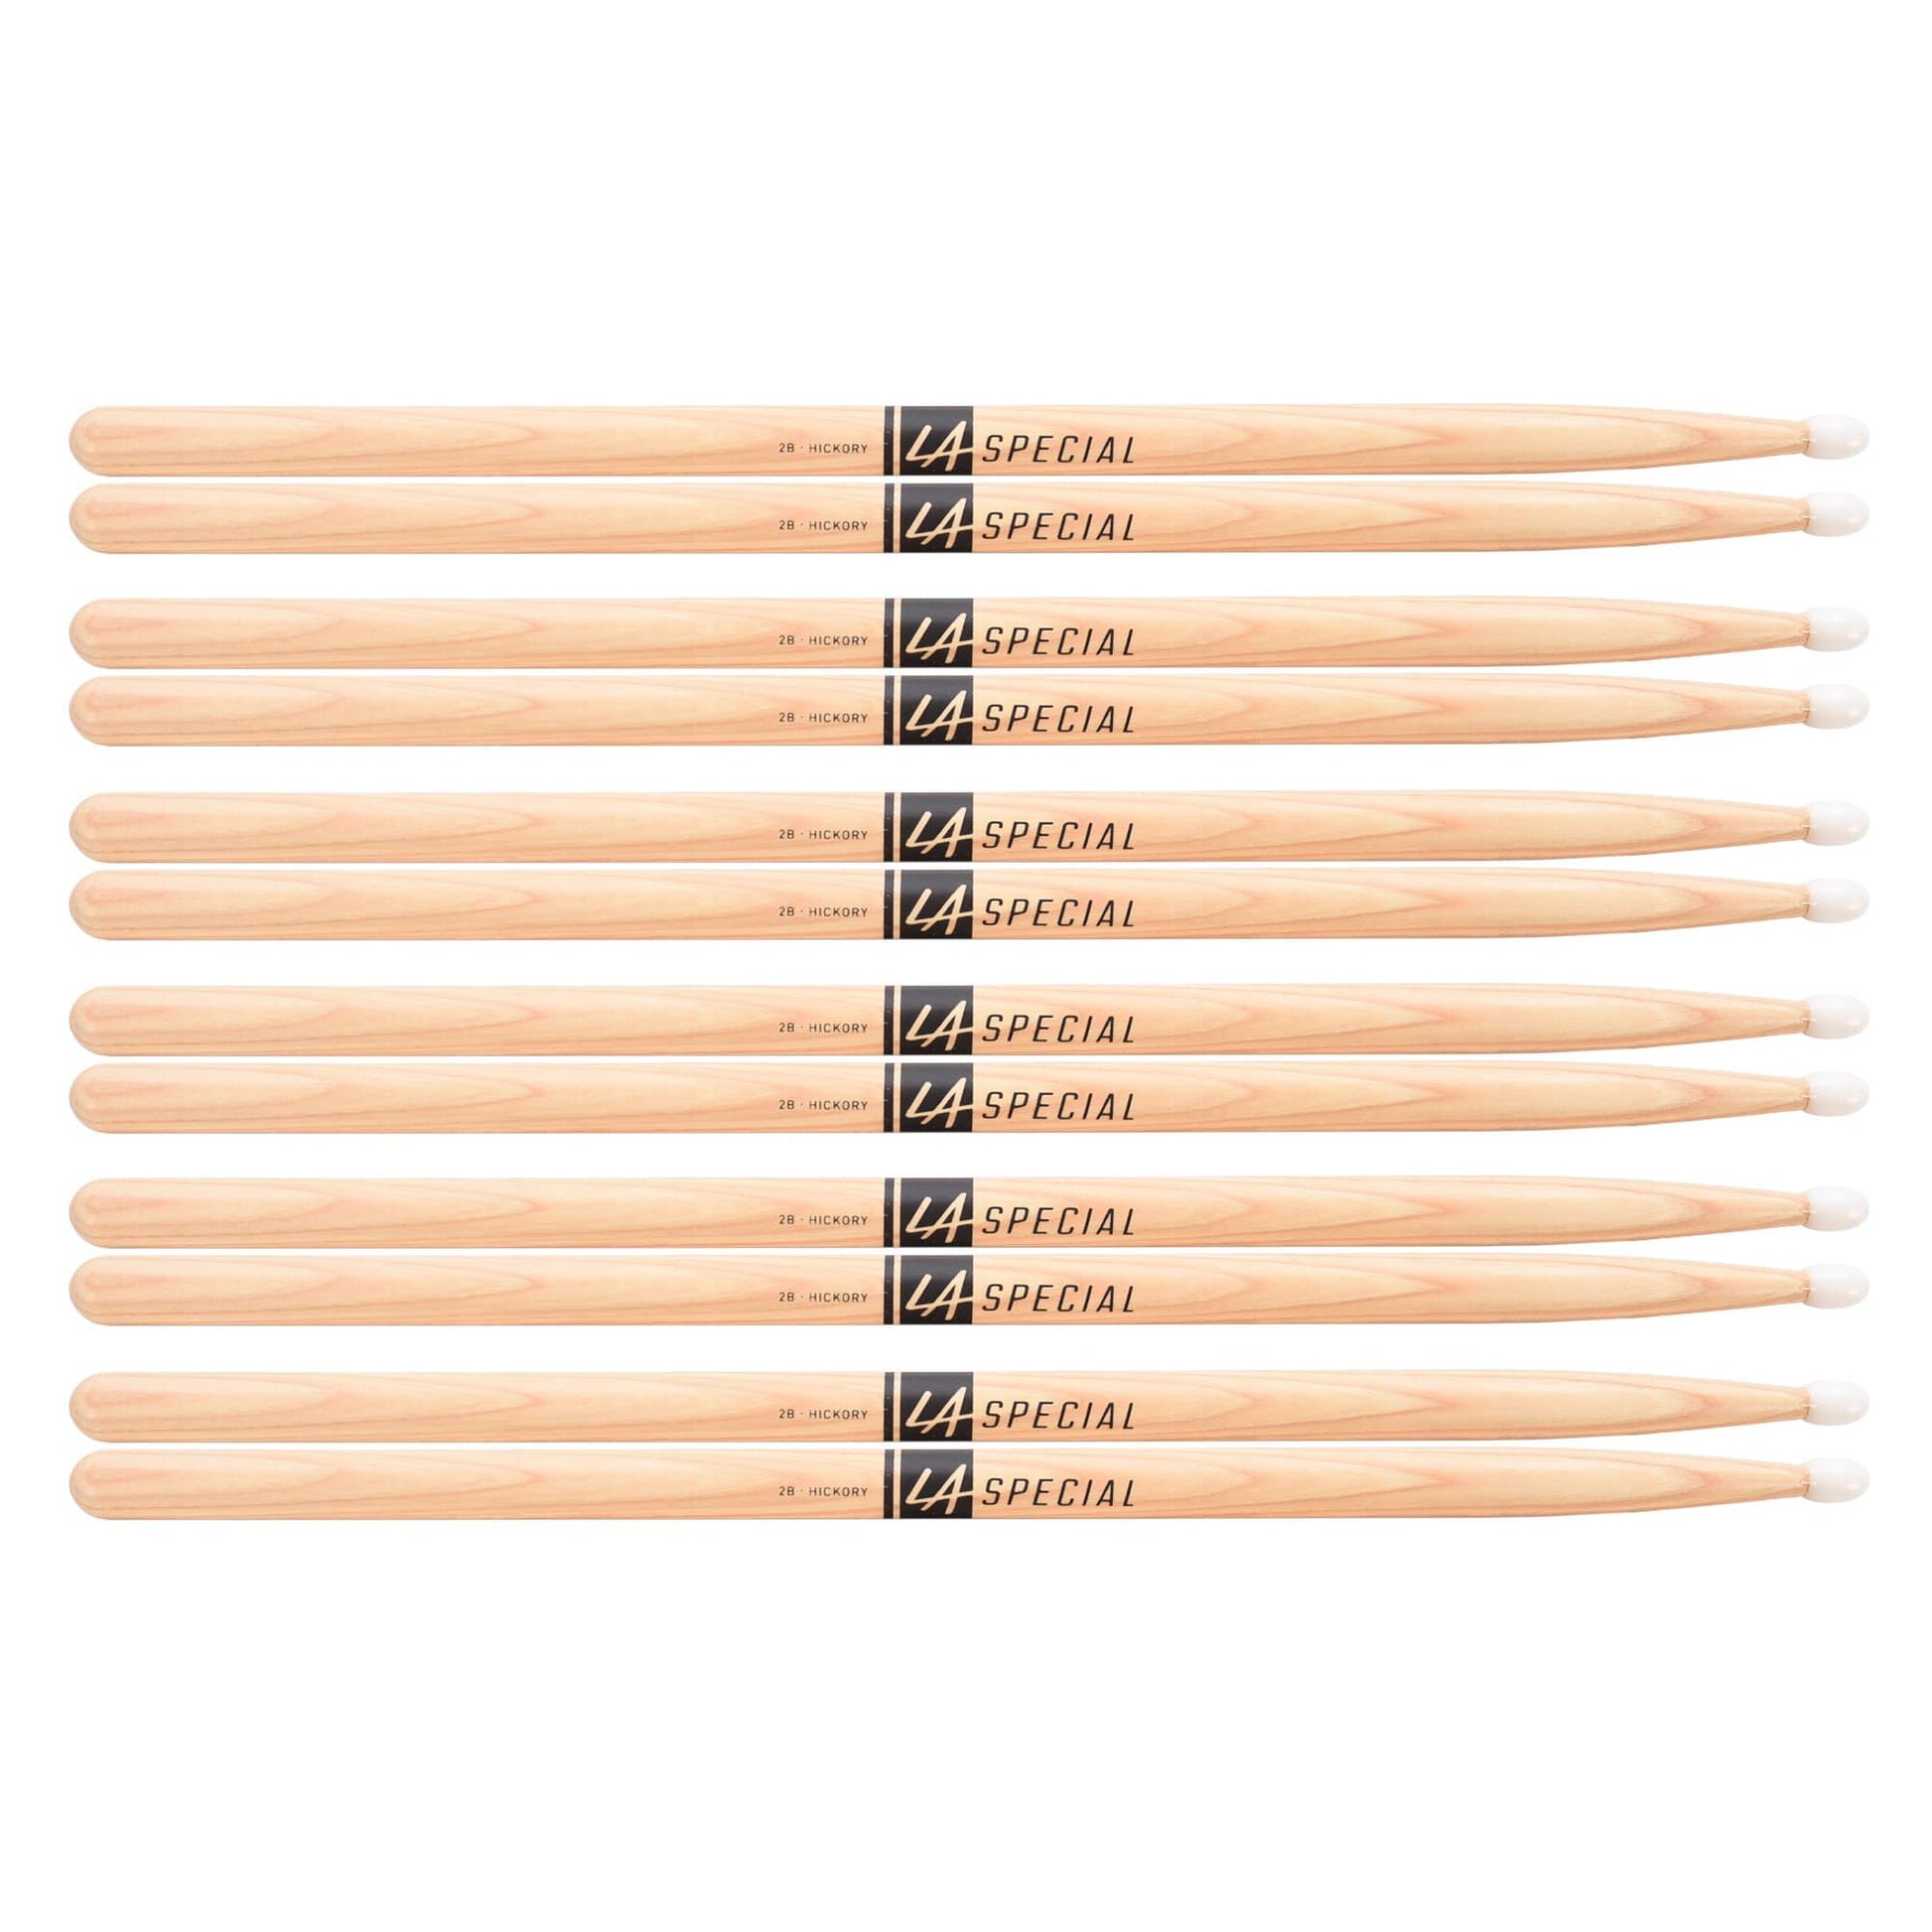 Promark LA Special 2B Nylon Tip Drum Sticks (6 Pair Bundle) Drums and Percussion / Parts and Accessories / Drum Sticks and Mallets